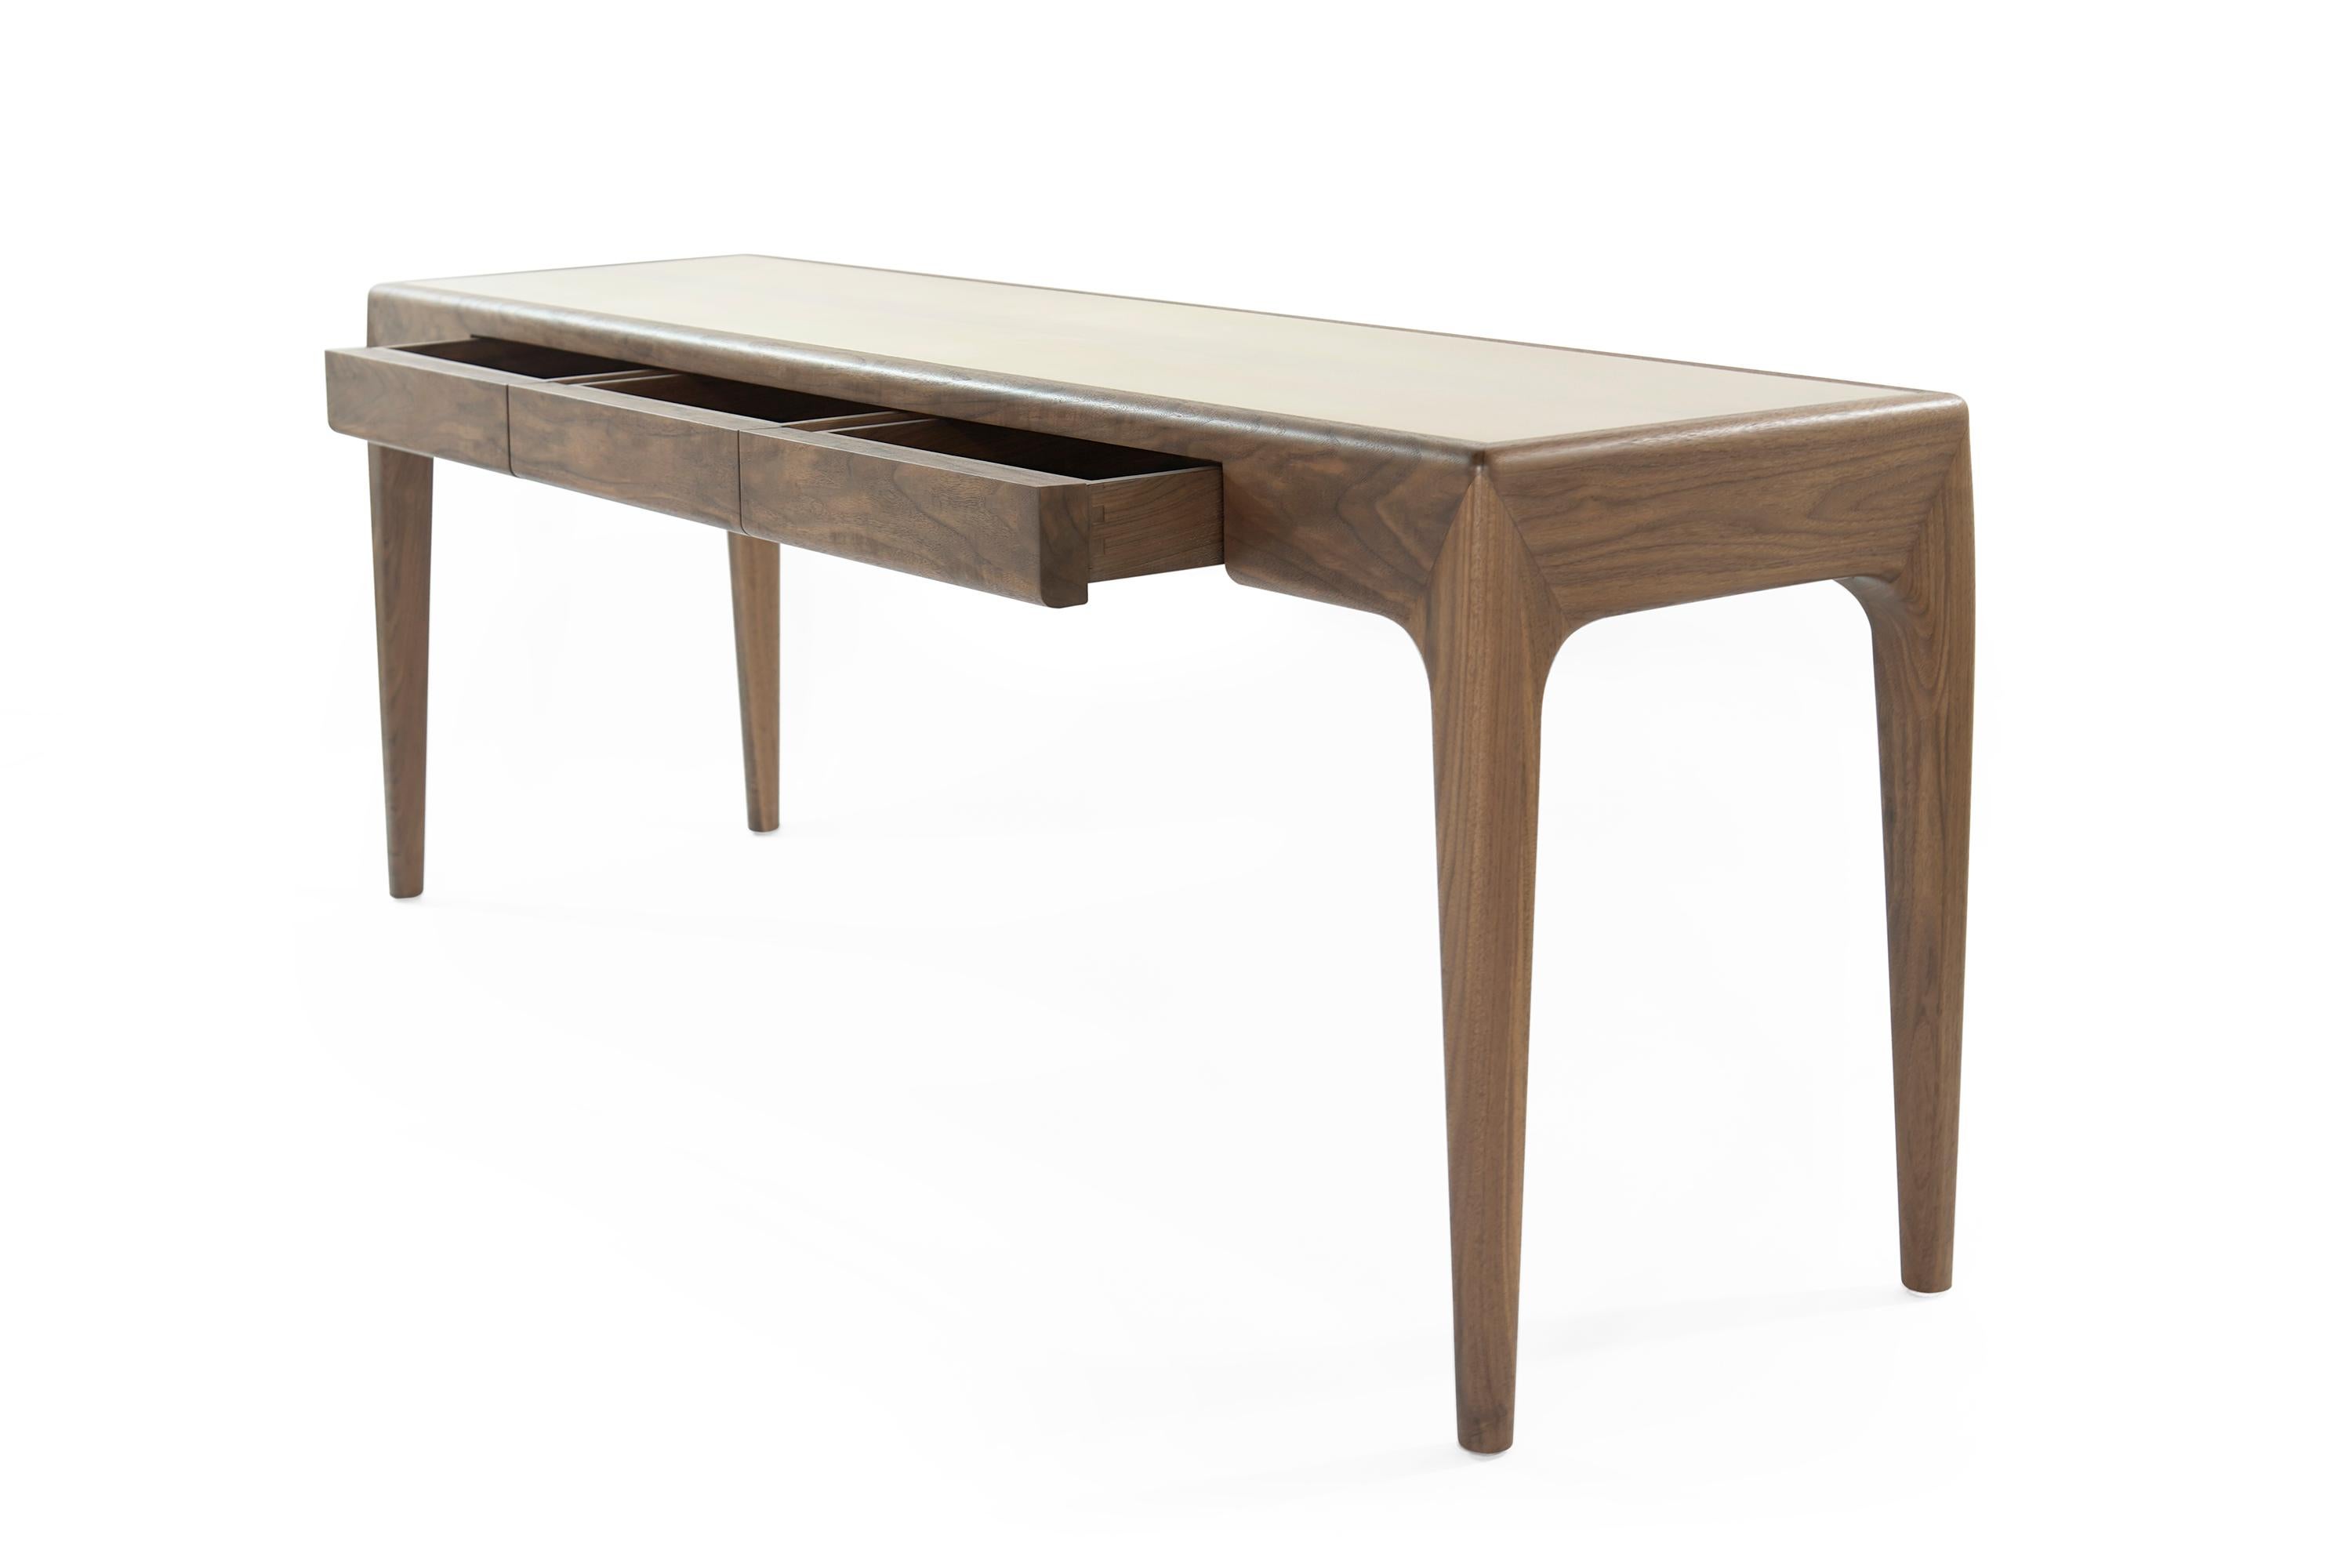 Walnut Olivia Console Table by Stamford Modern